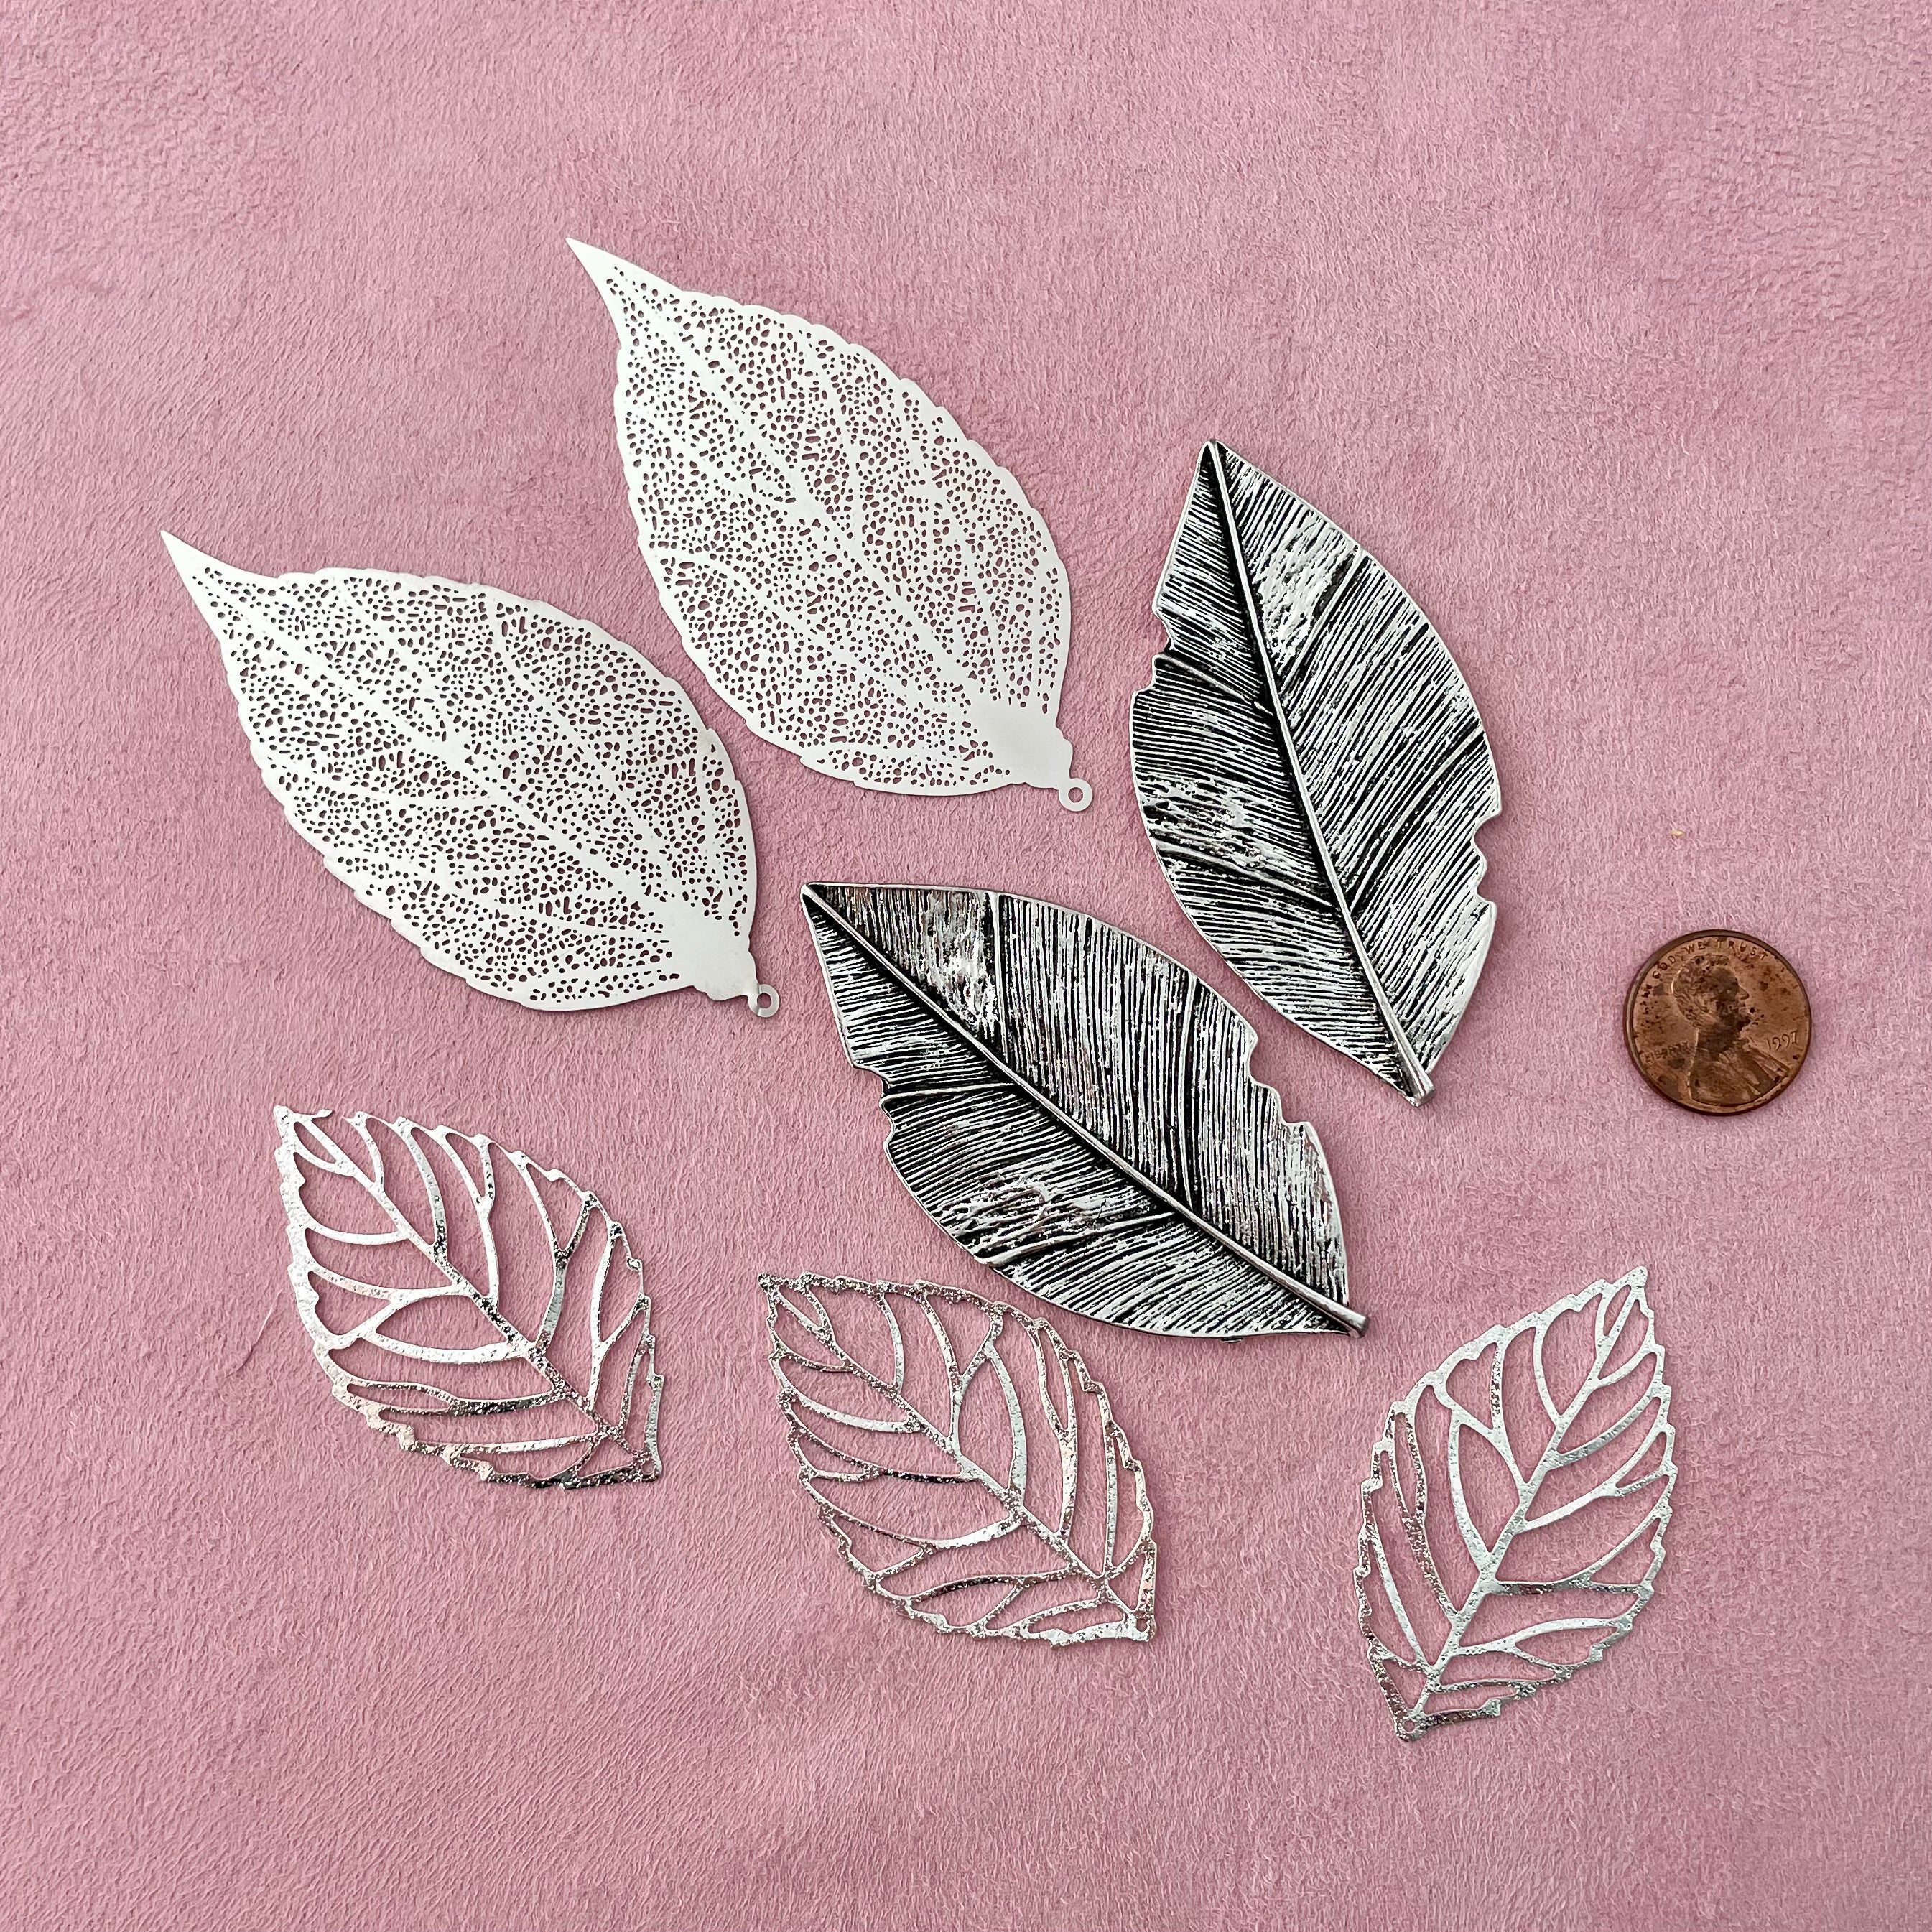 7 styling leaves including 3 silver leaves, 2 silver leaves that are larger, and 2 large silver with dark accent leaves with penny beside for size reference - wedding flat lay props from Champagne & GRIT